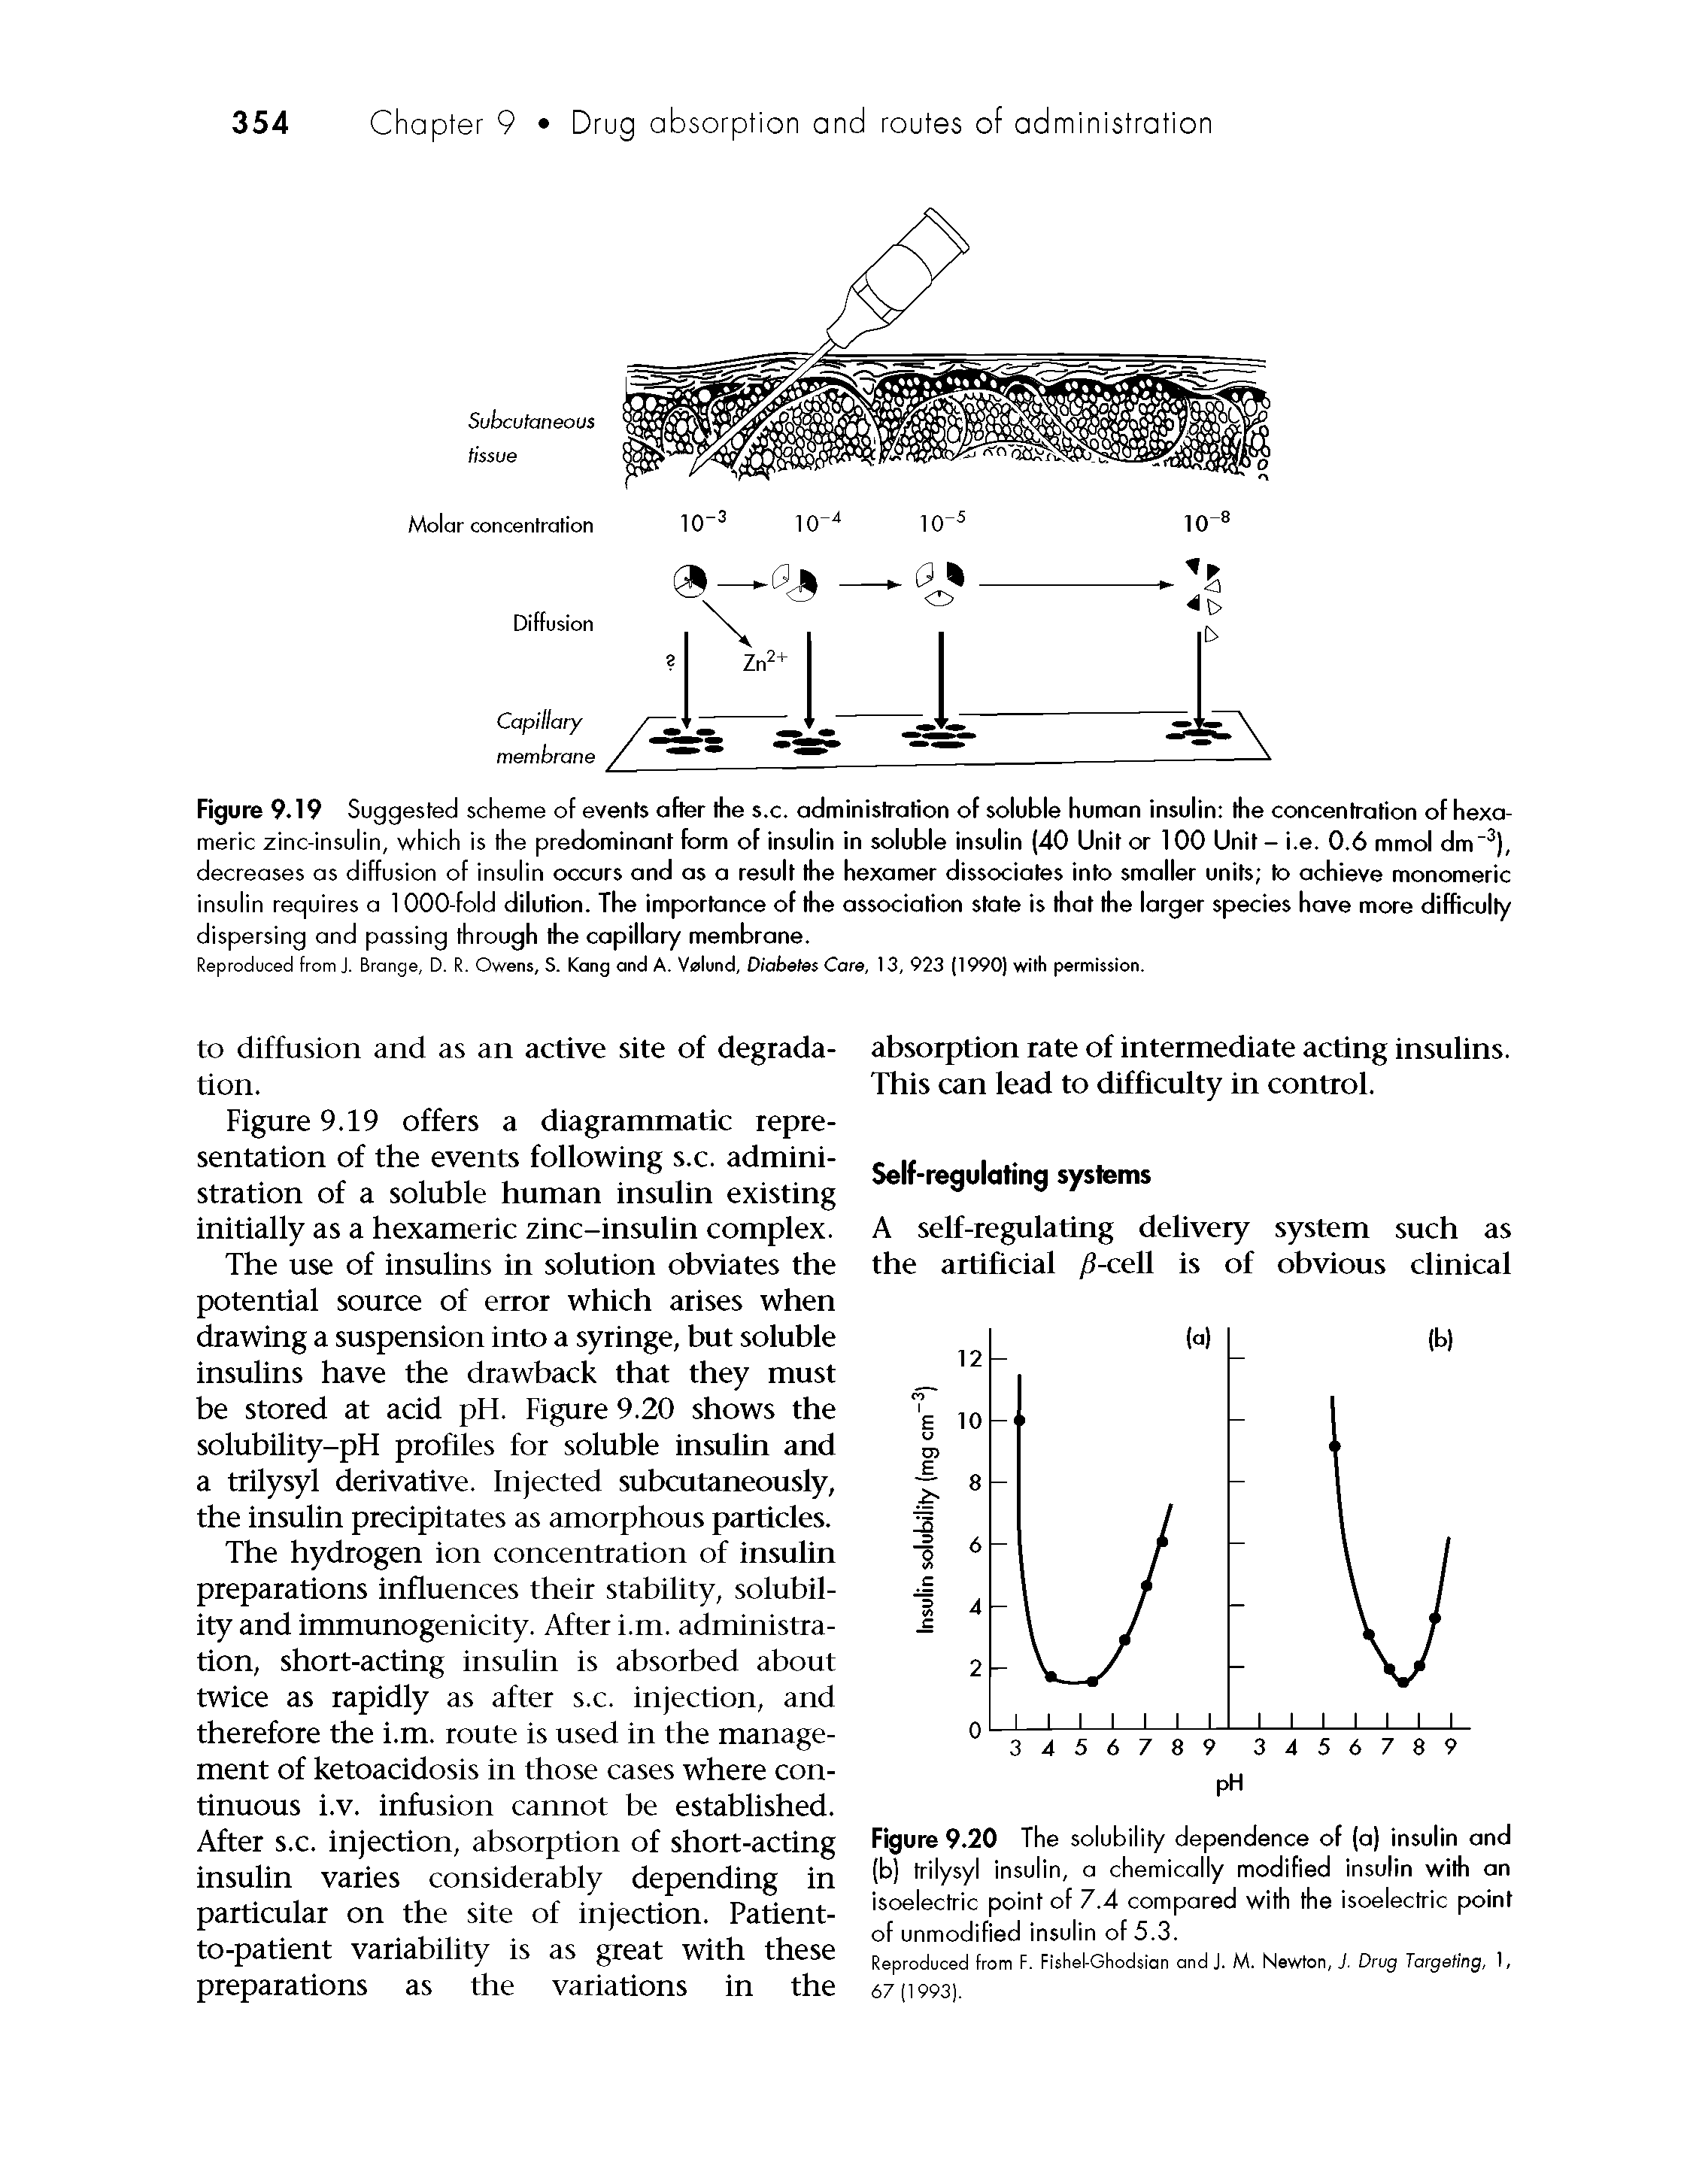 Figure 9.20 The solubility dependence of (a) insulin and (b) trilysyl insulin, a chemically modified insulin with an isoelectric point of 7.4 compared with the isoelectric point of unmodified insulin of 5.3.